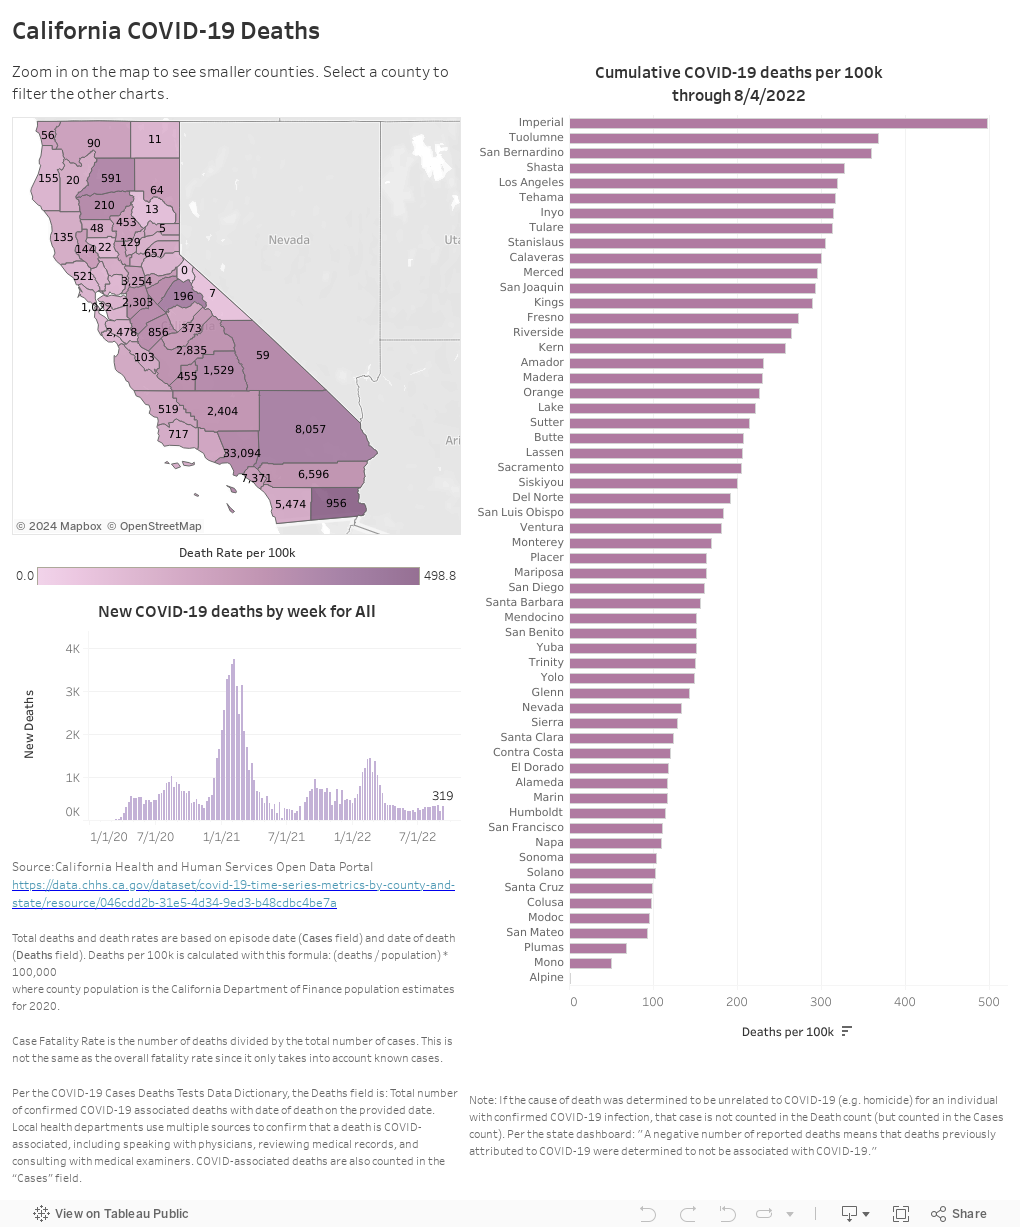 California Deaths by County See the Data